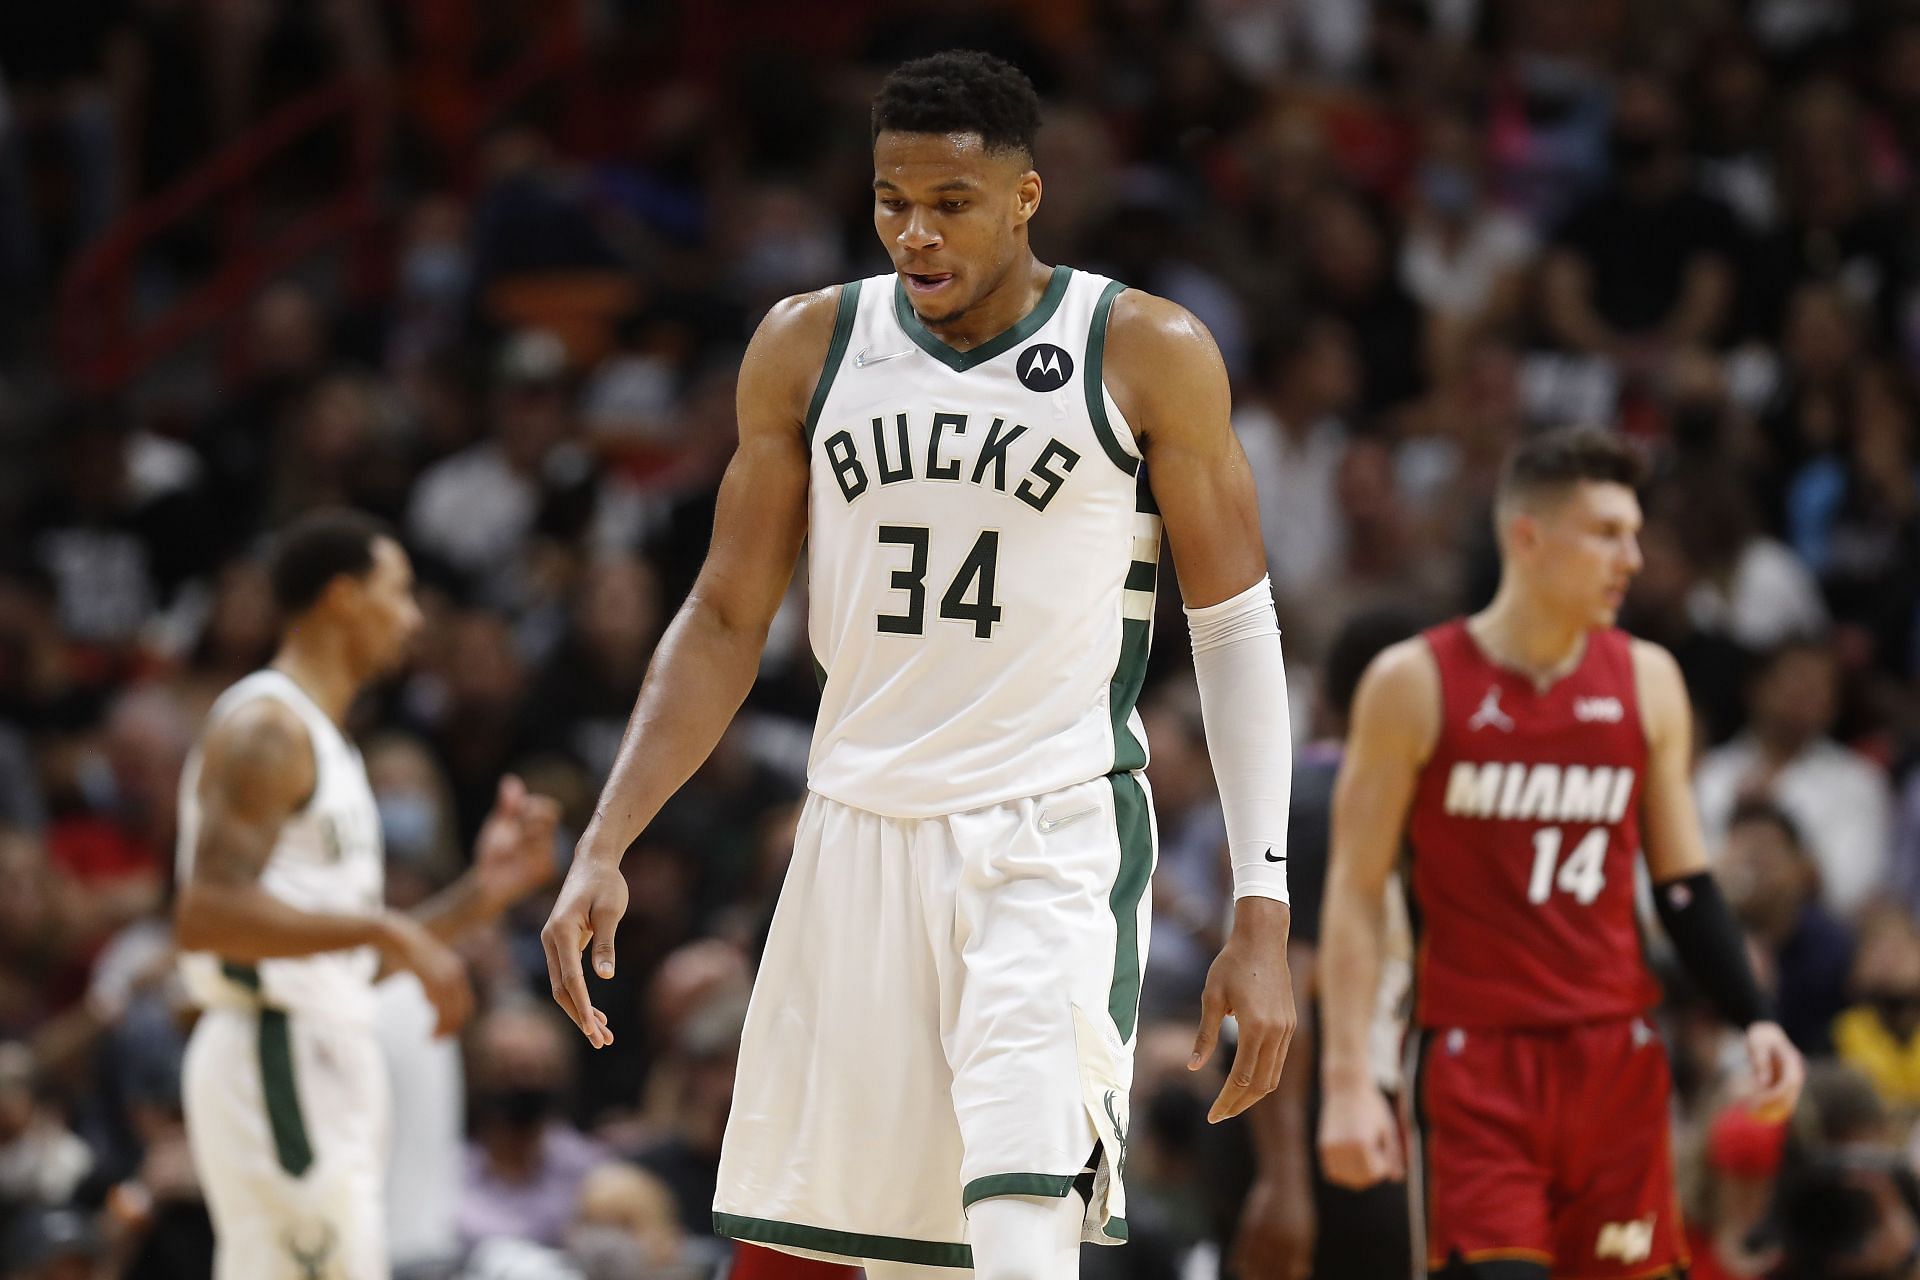 Giannis Antetokounmpo is considered to be the best power forward in the NBA right now.